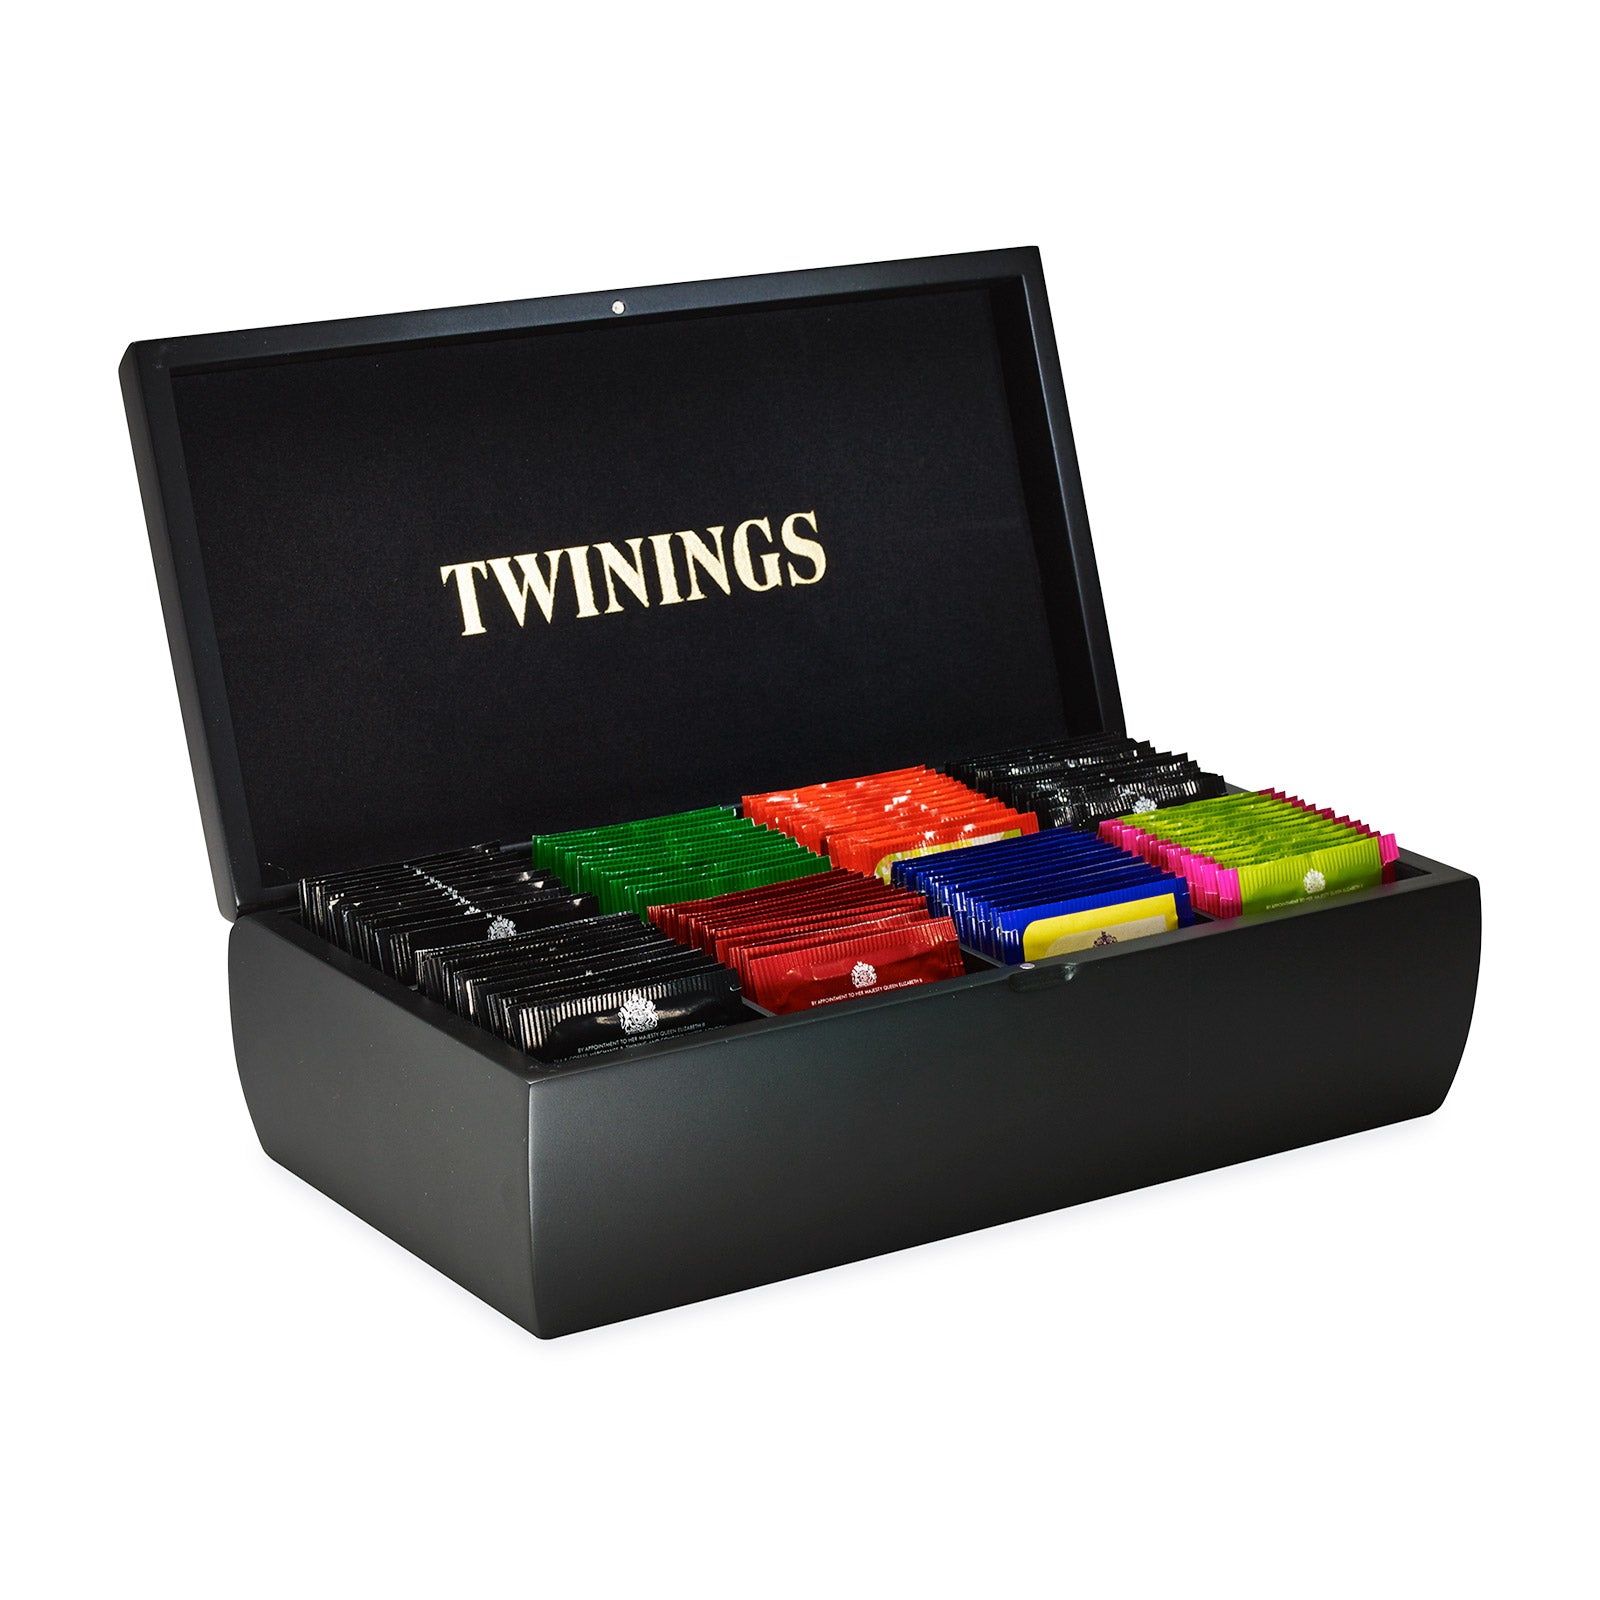 Twinings Black Wooden Tea Box - 8 Compartment Filled